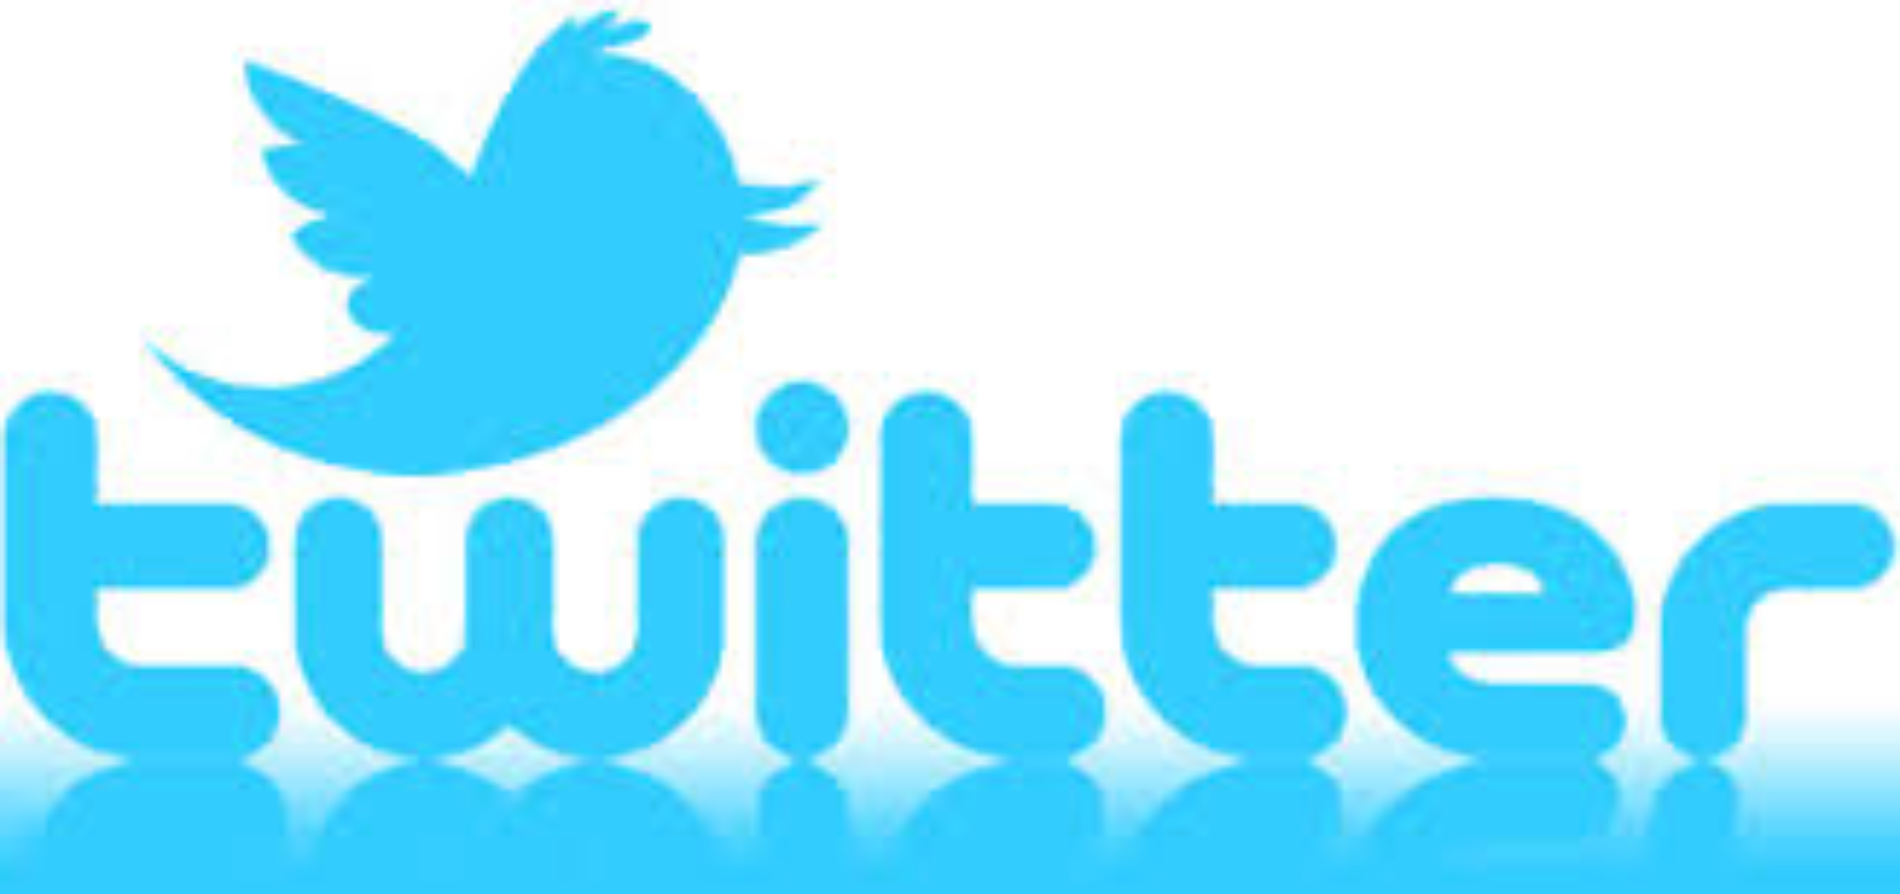 And Information Management Extension Business Media Twitter PNG Image